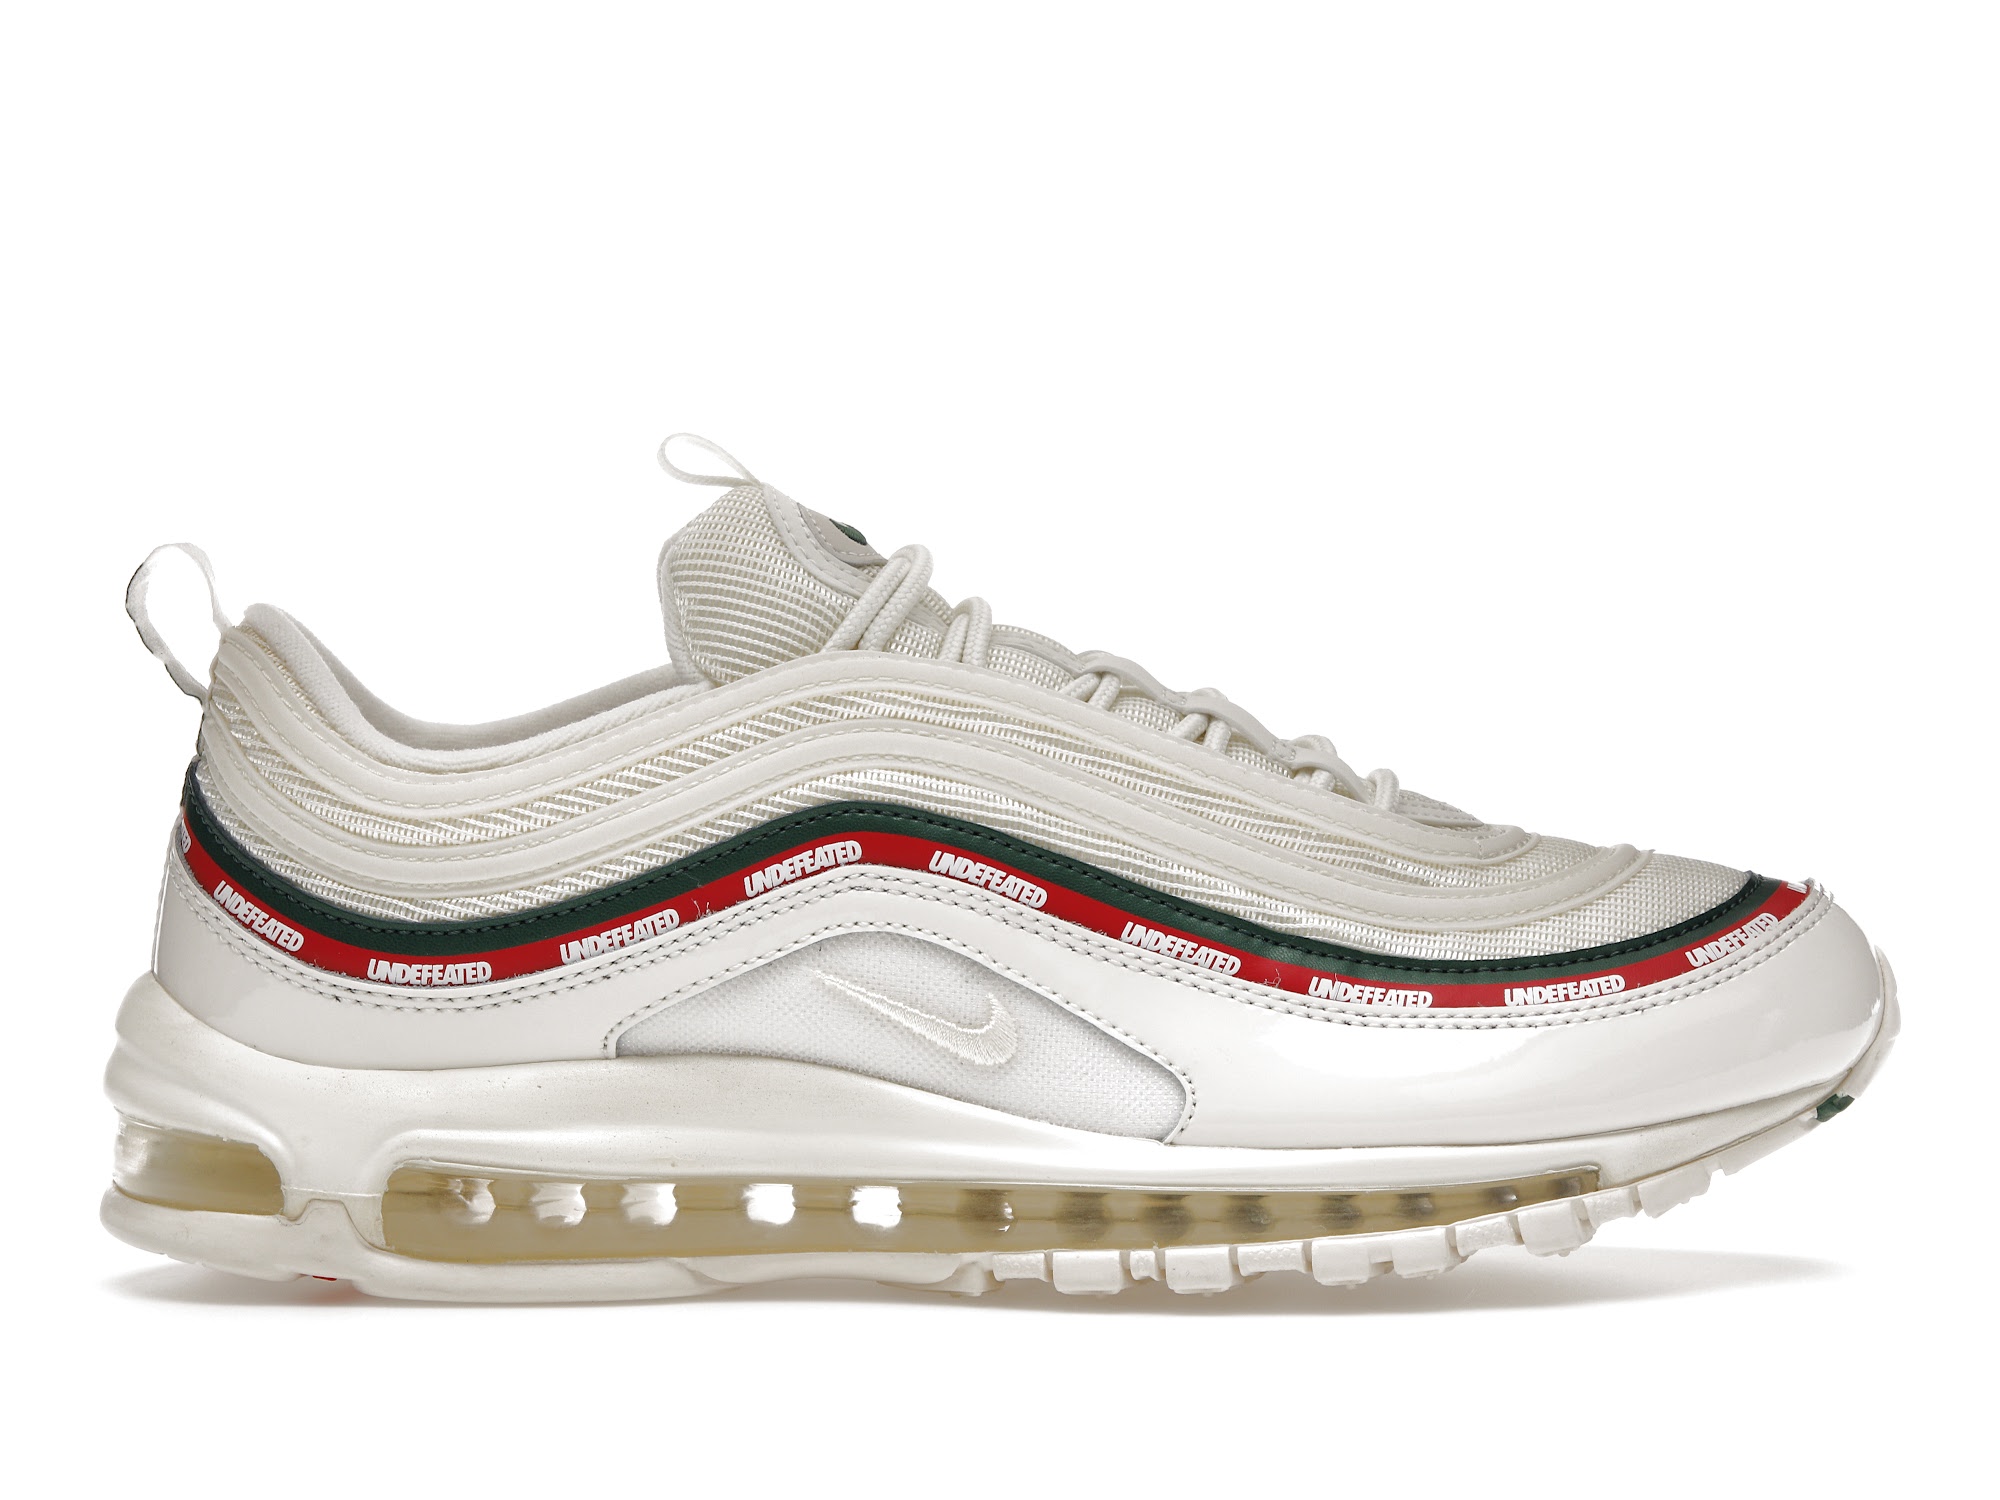 NIKE Air Max 97 UNDEFEATEDメインカラーグリーン